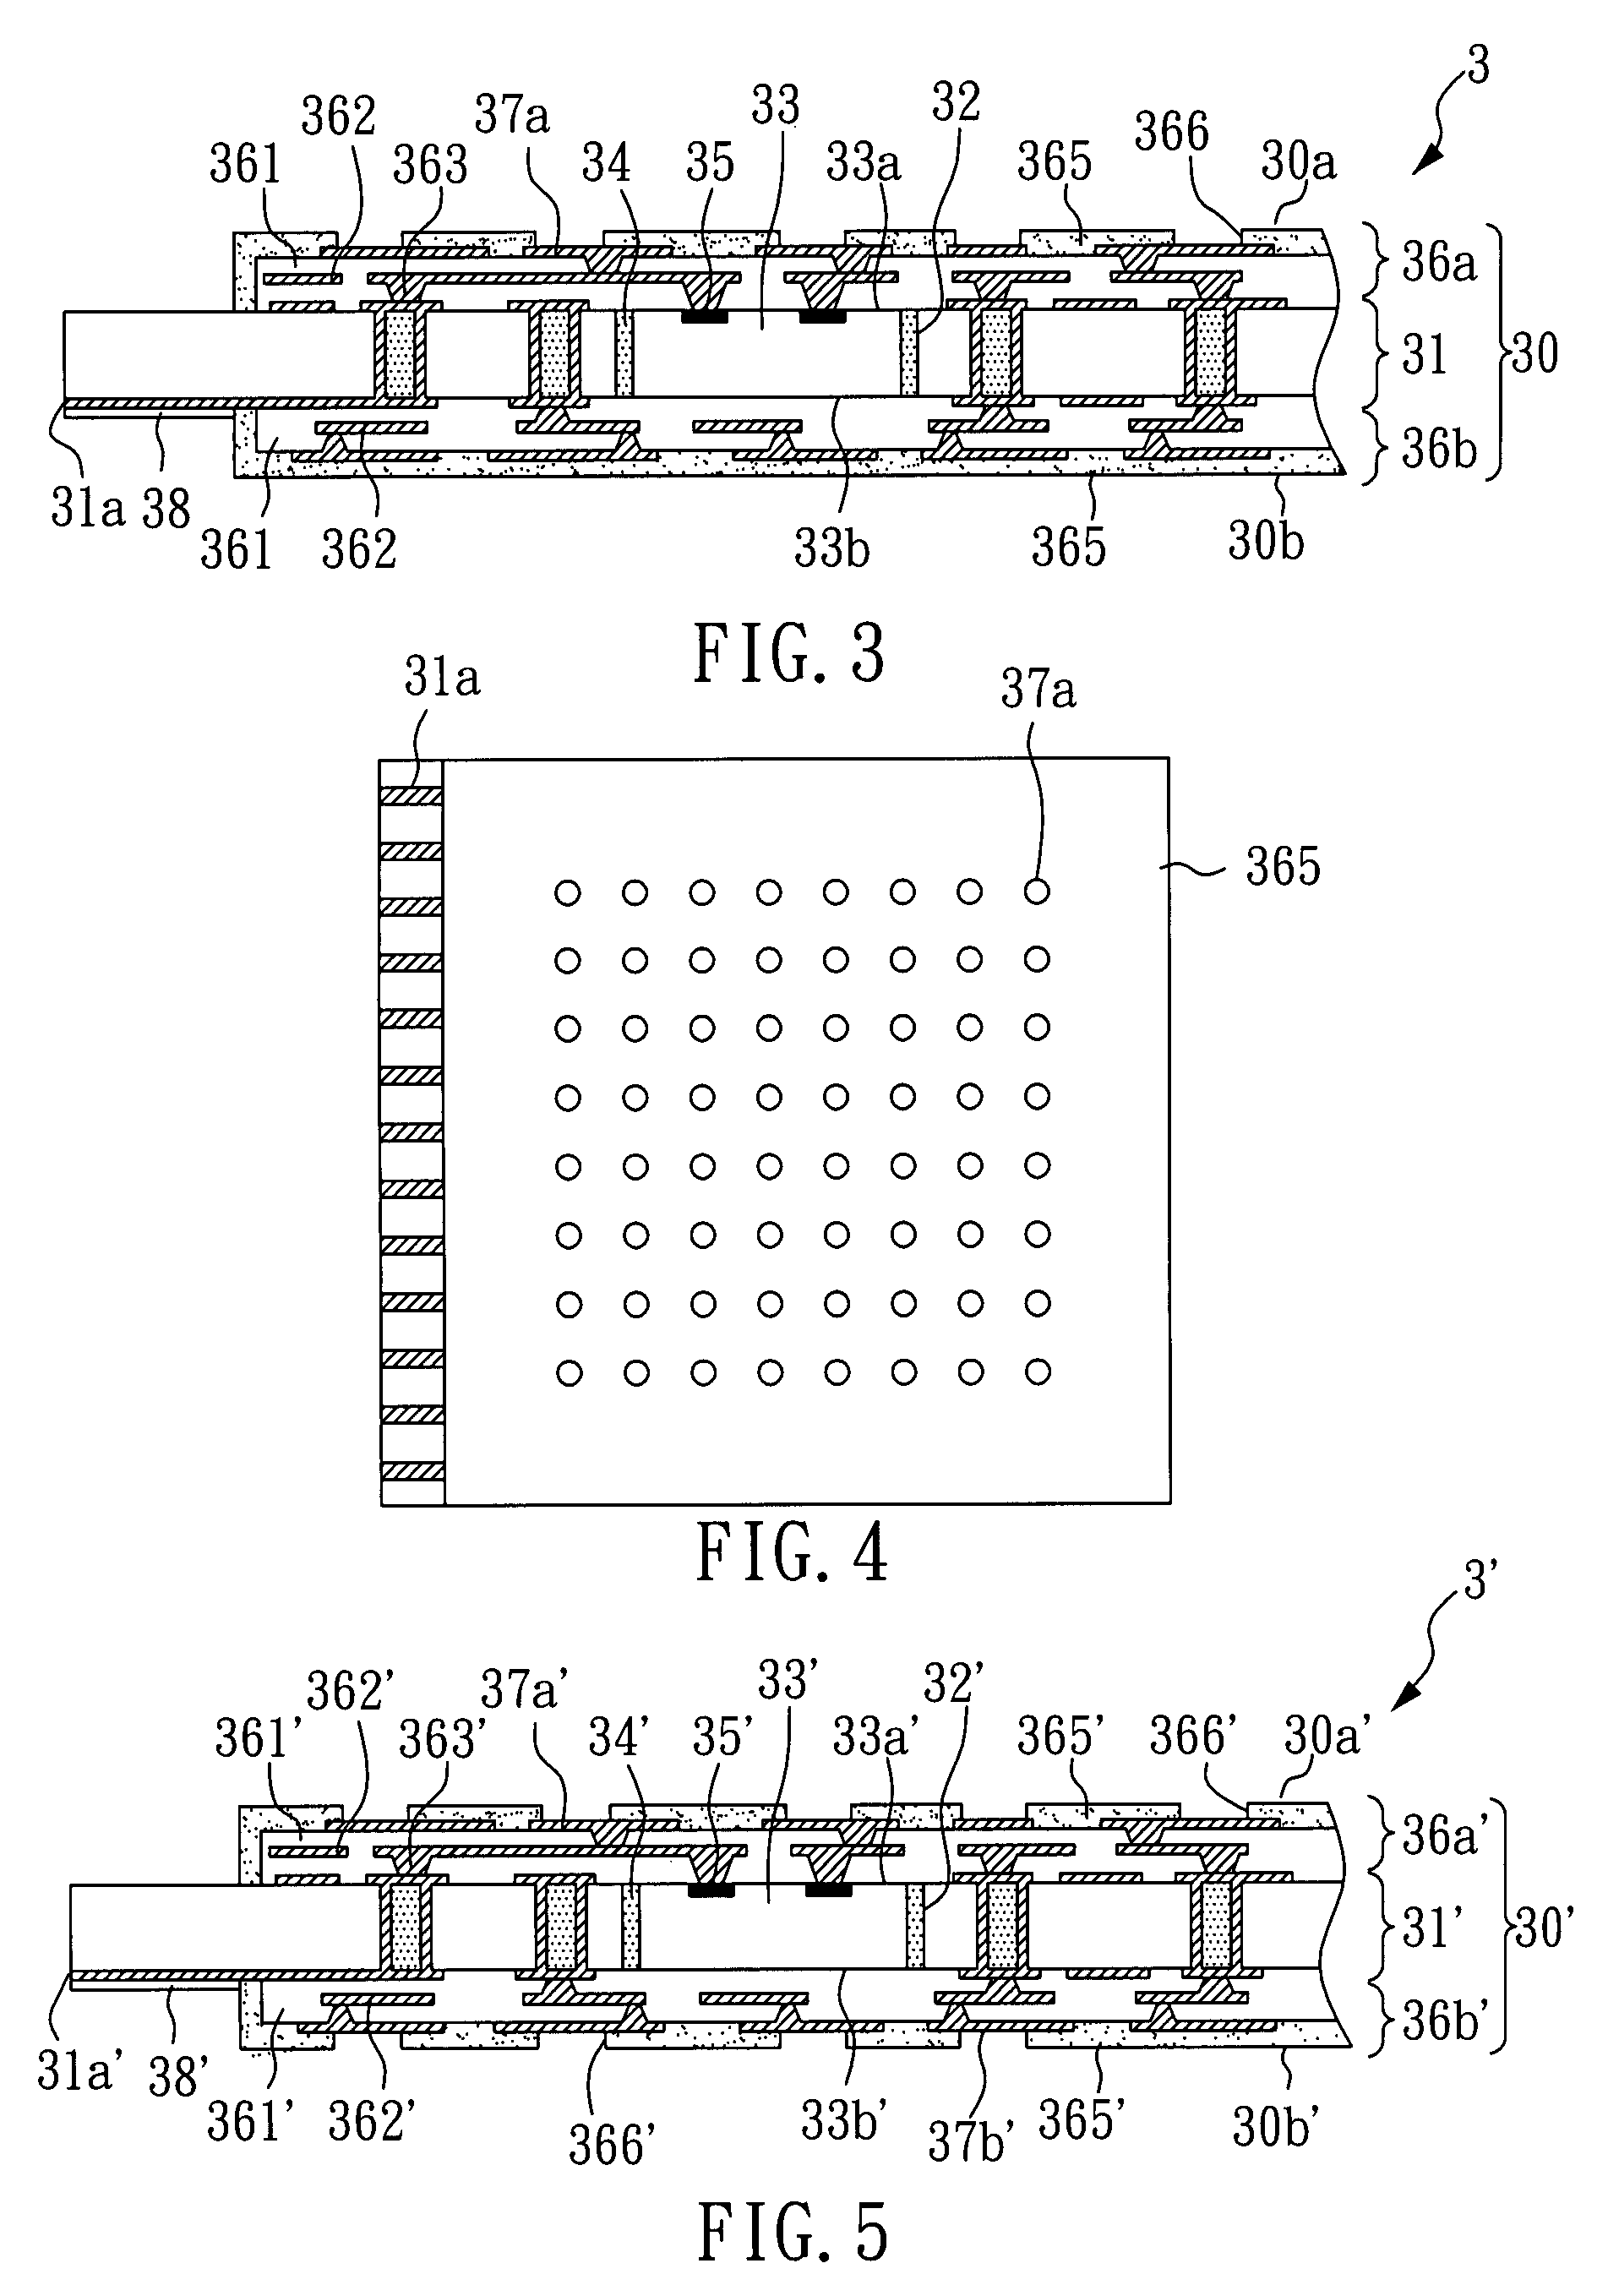 Stacked package module and board having exposed ends